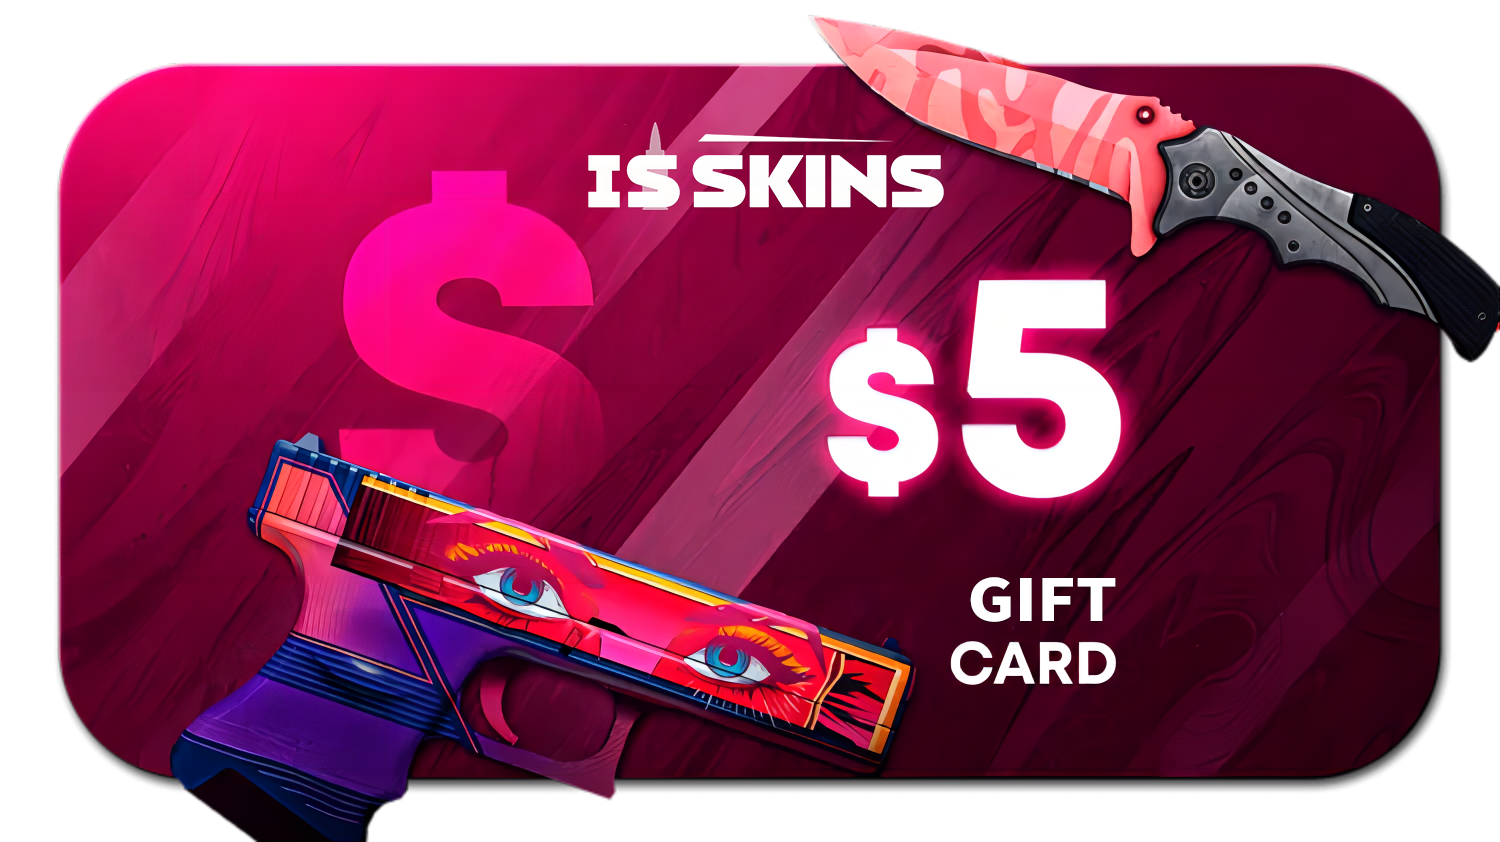 ISSKINS $5 Gift Card $5.29